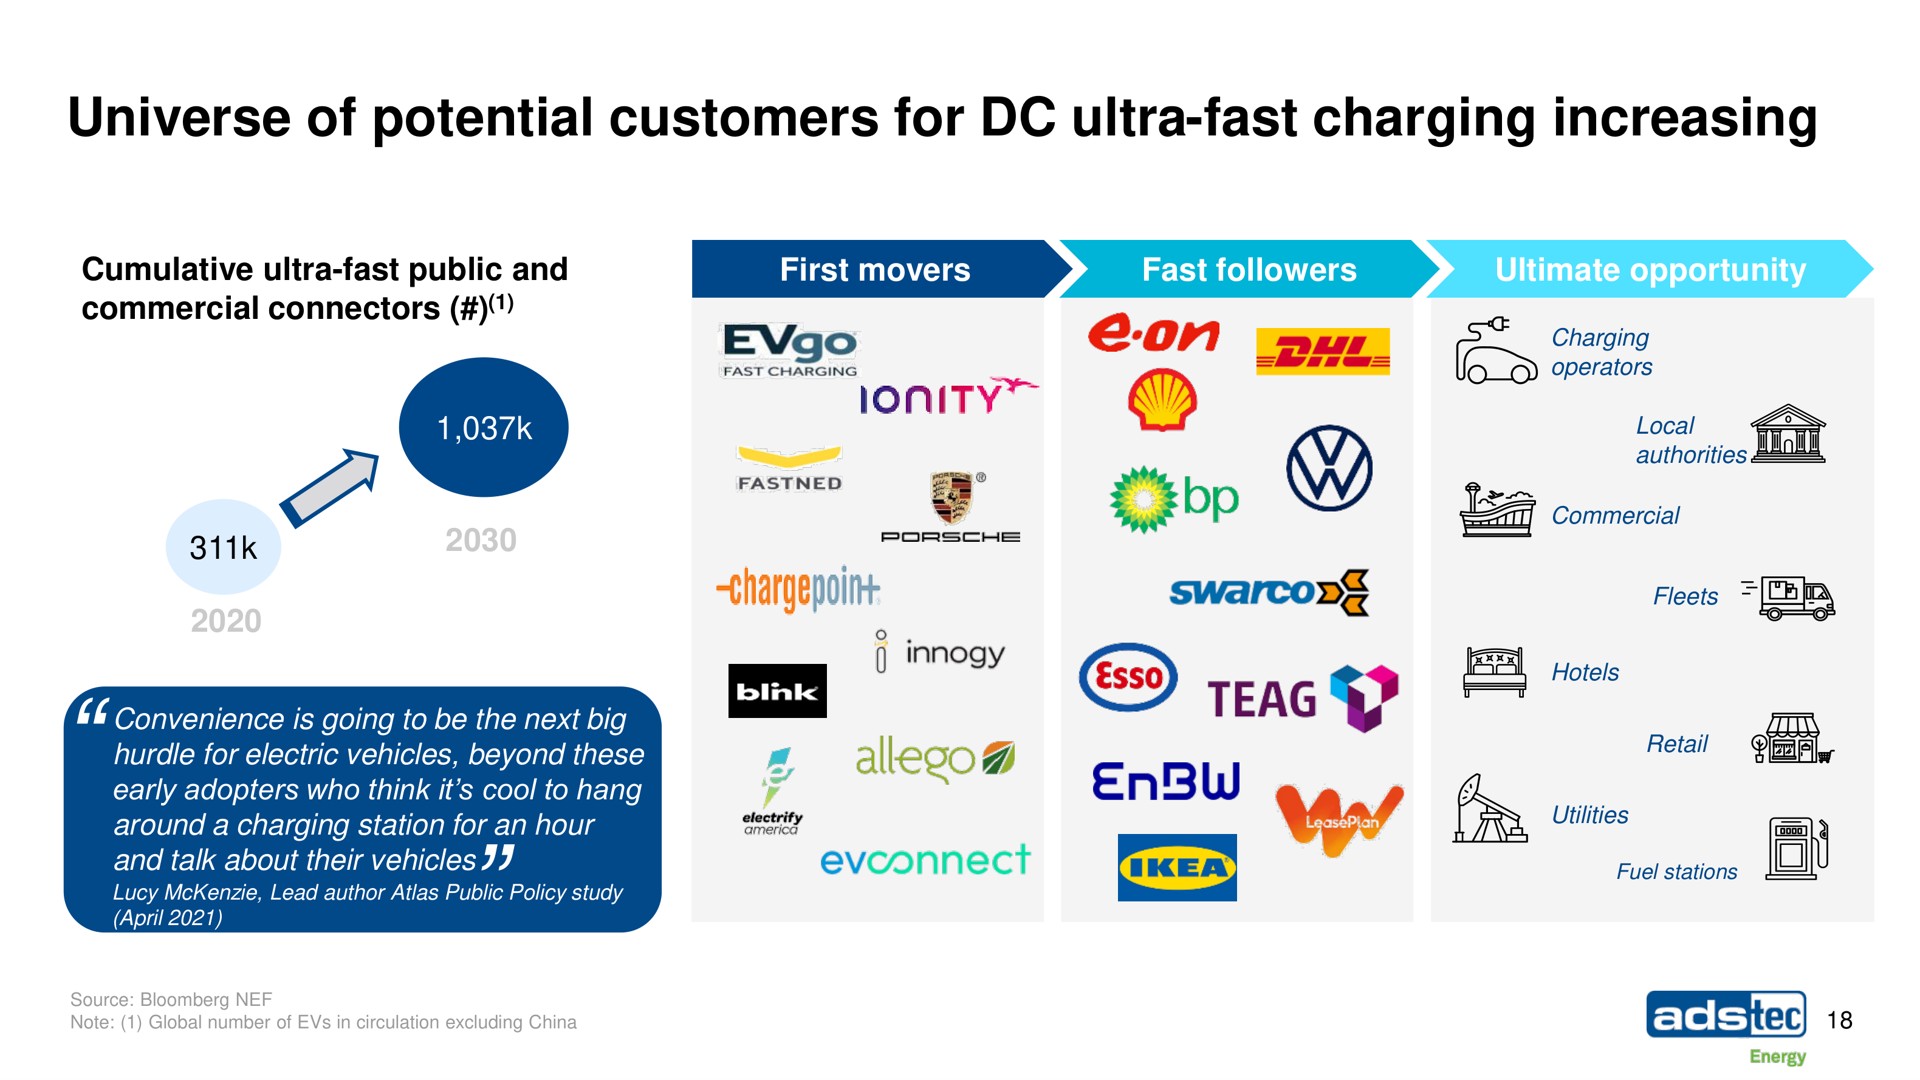 universe of potential customers for ultra fast charging increasing hotels | ads-tec Energy